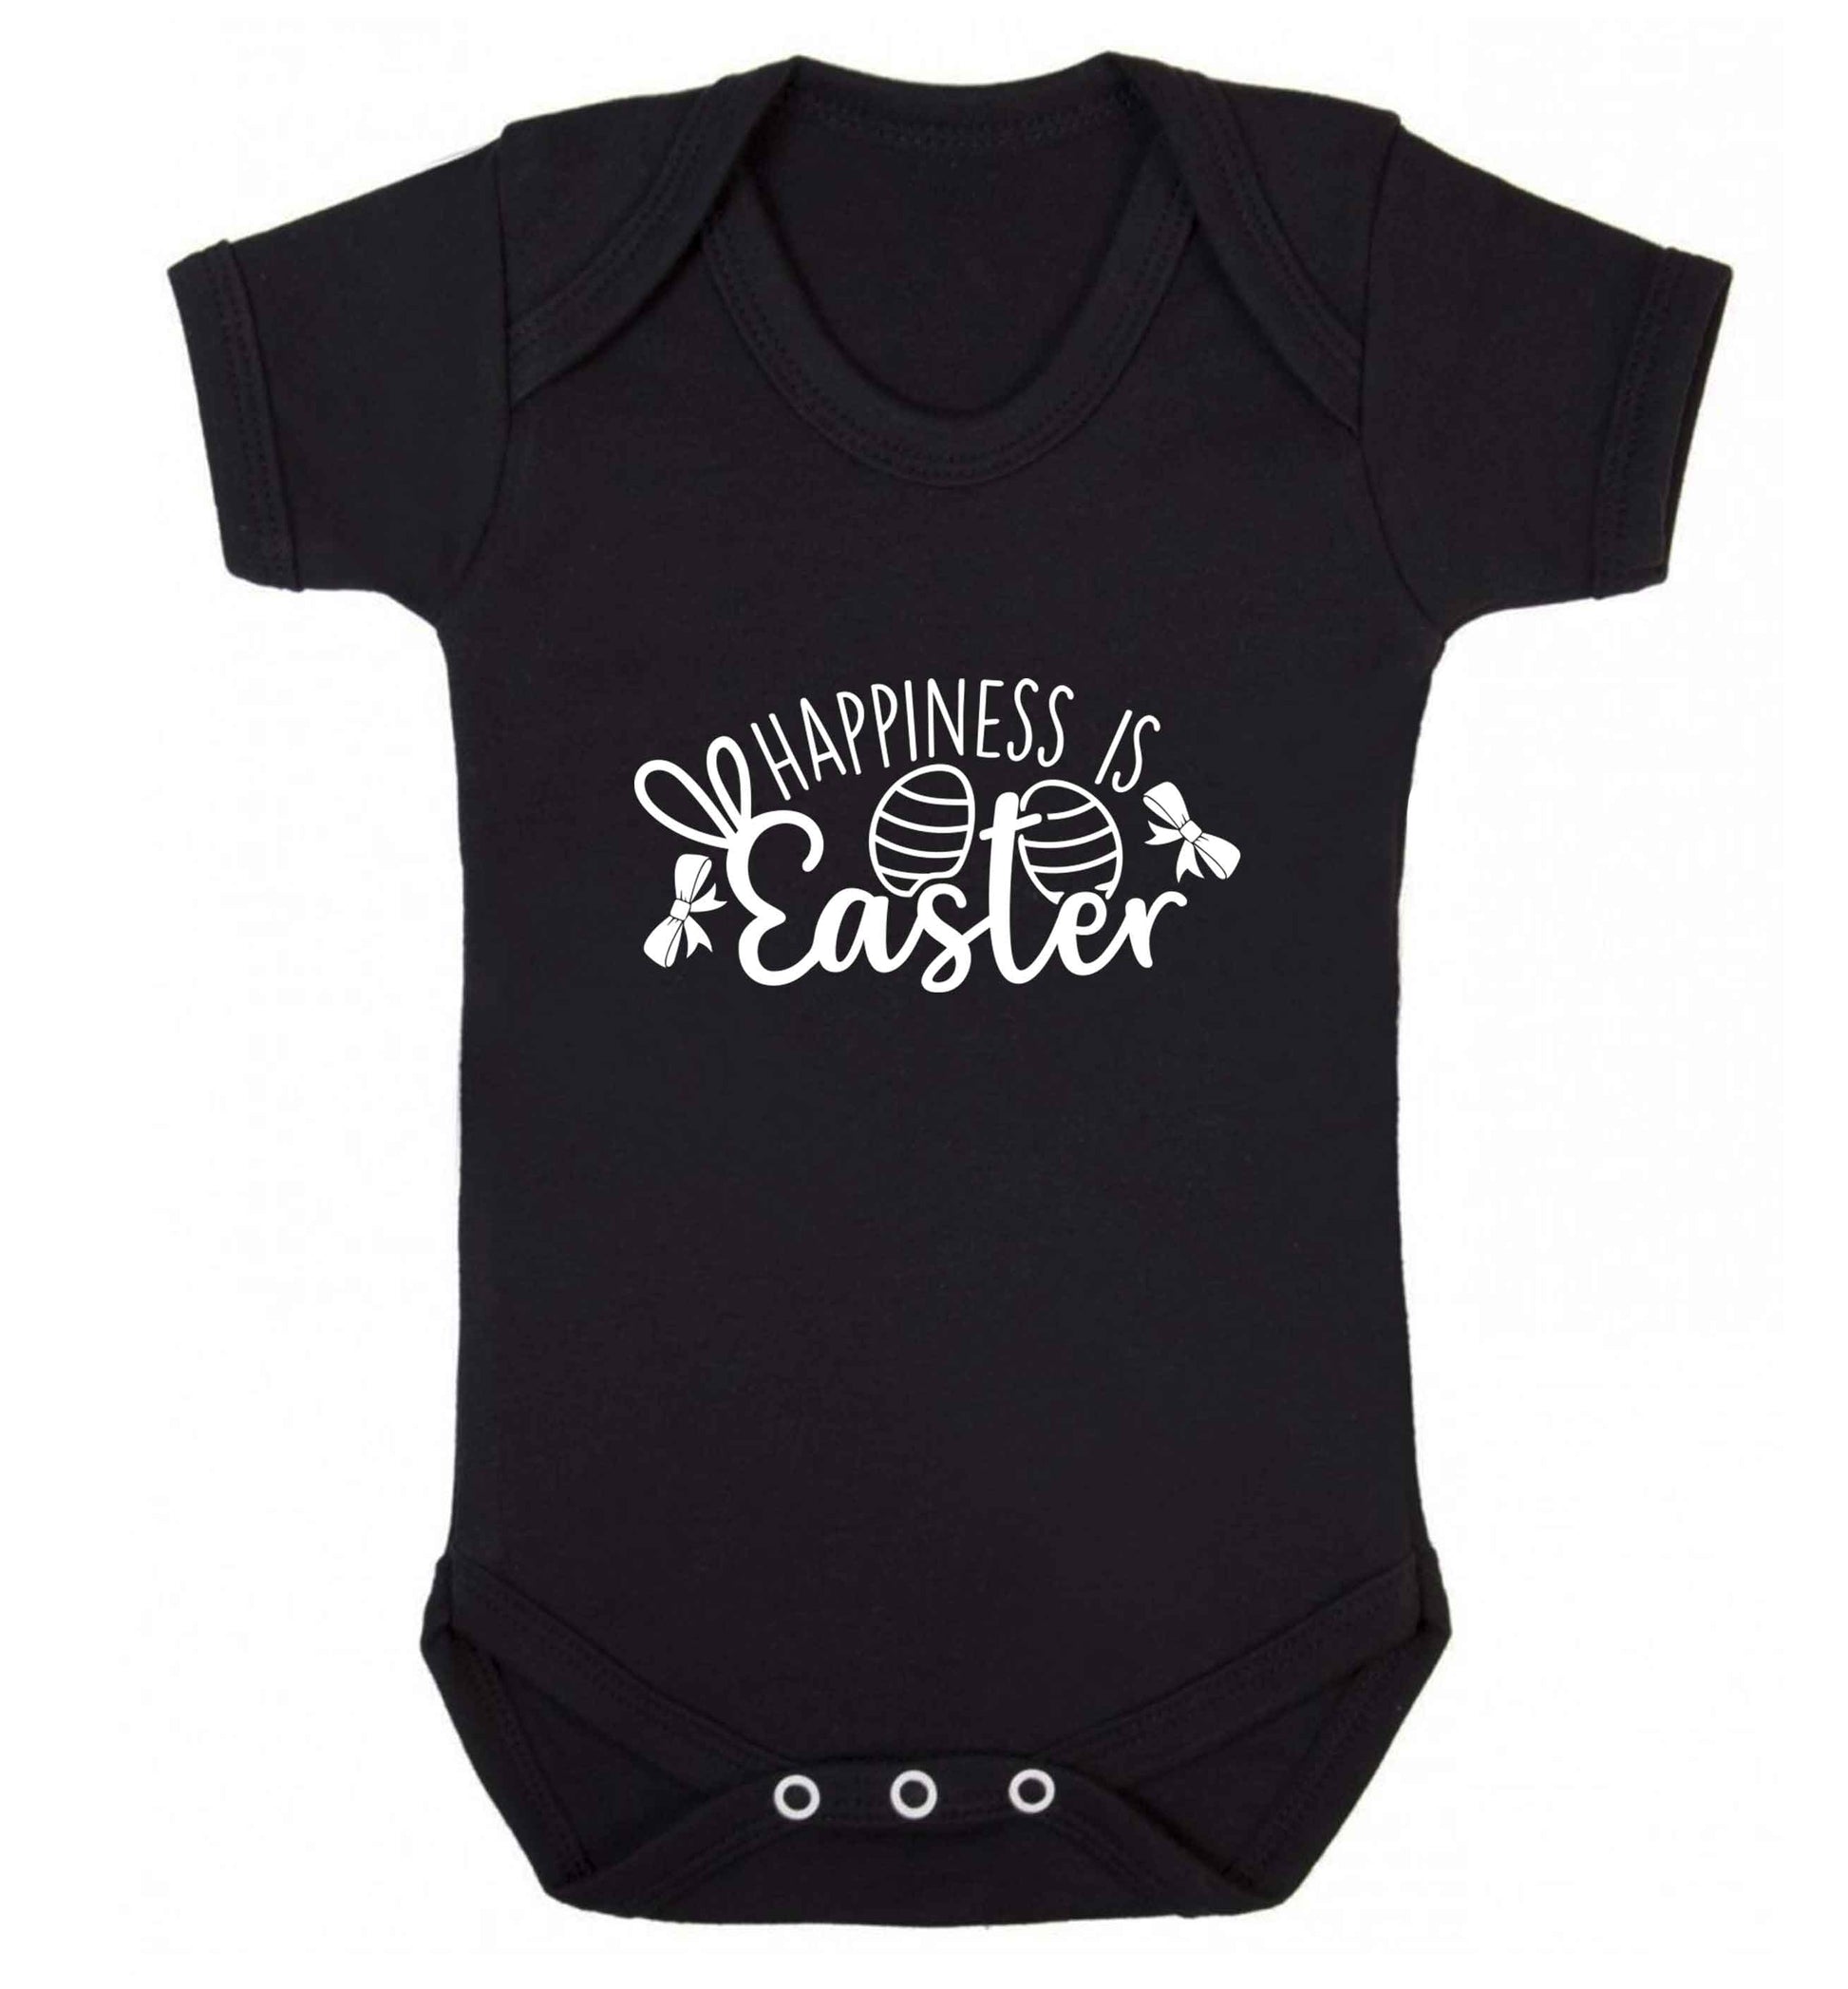 Happiness is easter baby vest black 18-24 months